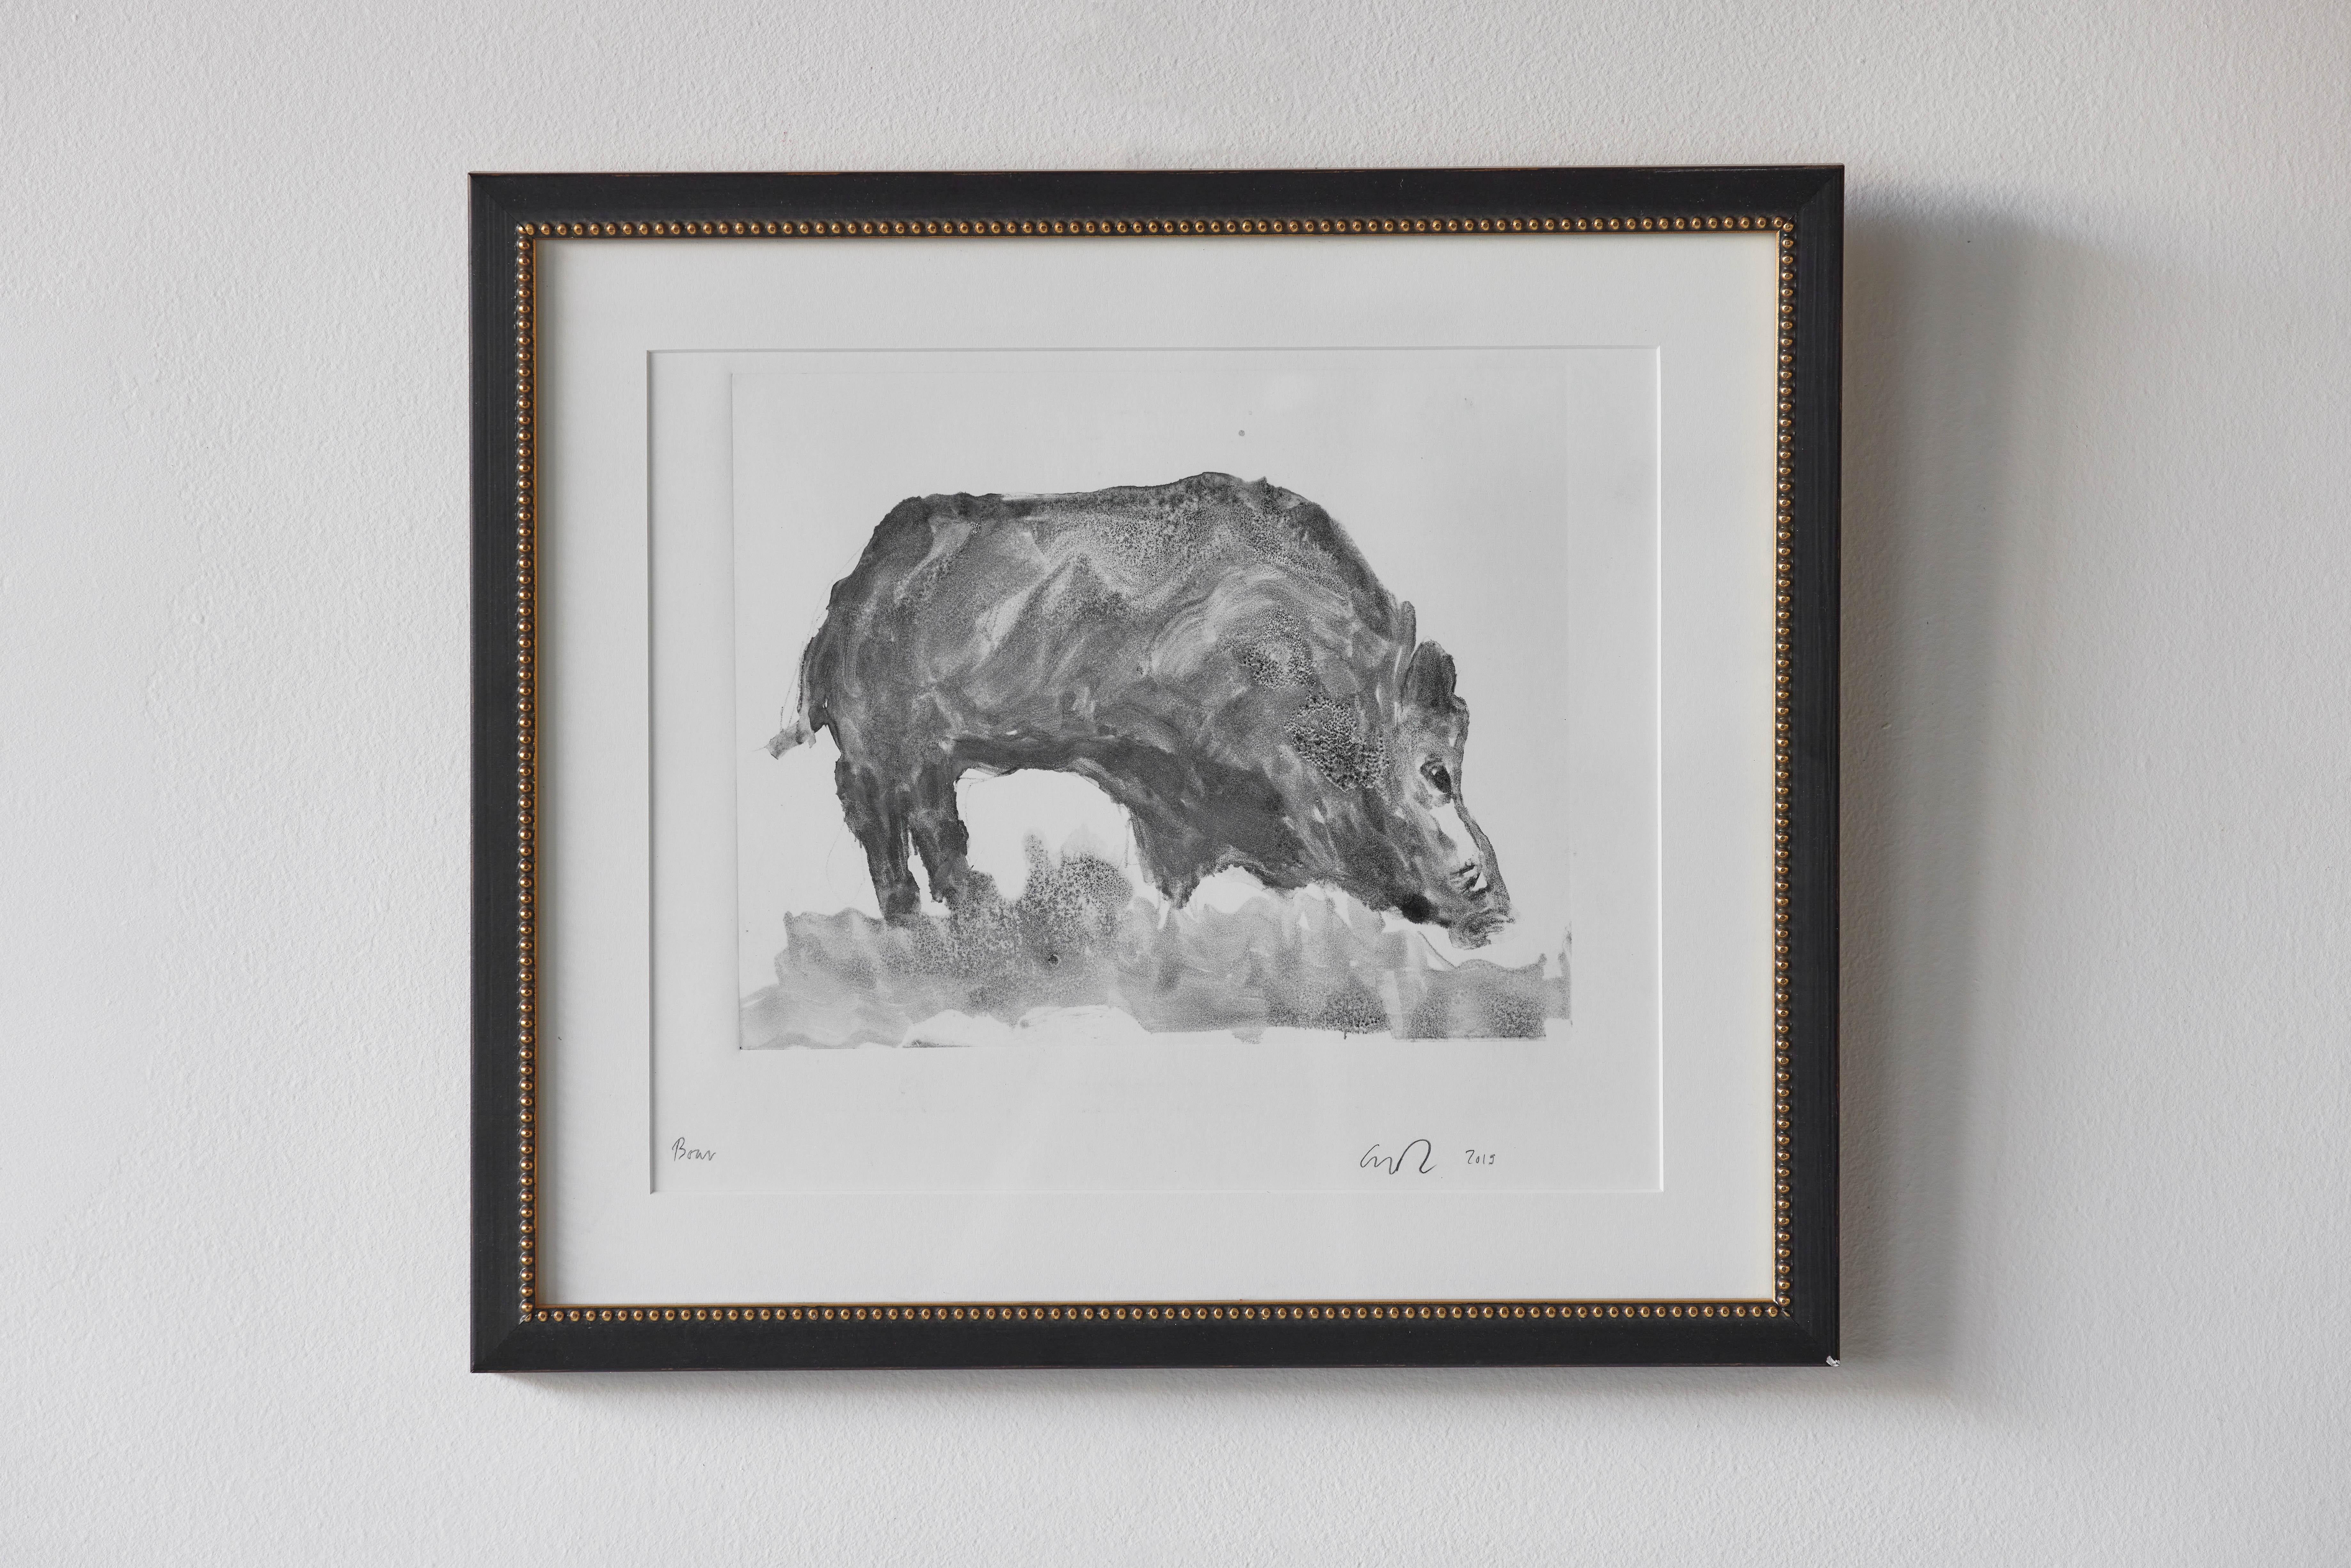 One of a kind monotype of a boar by Los Angeles based artist Cyril Kuhn. The monotype was newly framed.